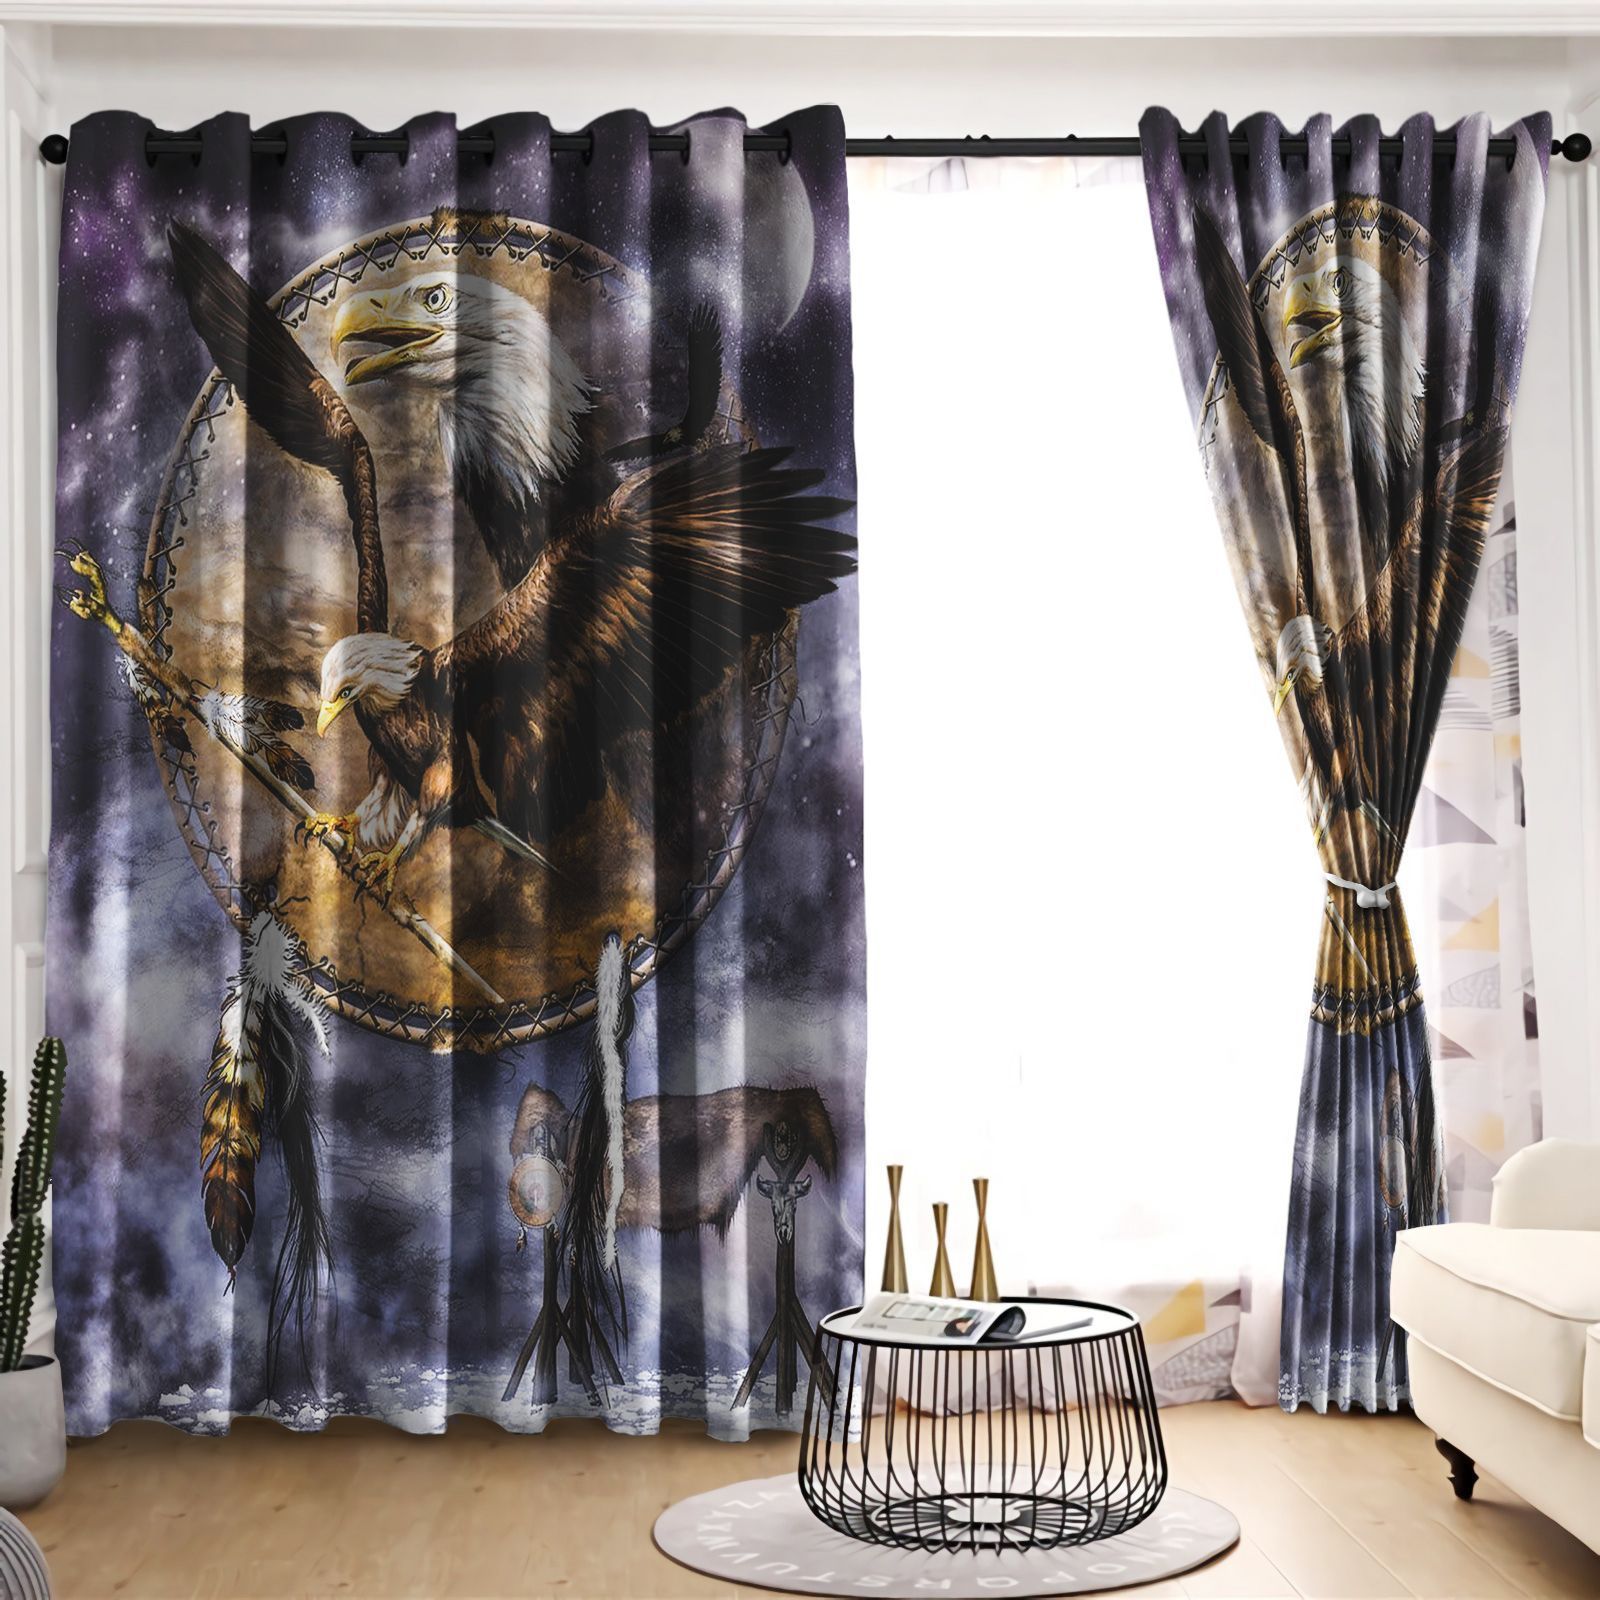 Eagle Under The Storm Printed Window Curtain Home Decor